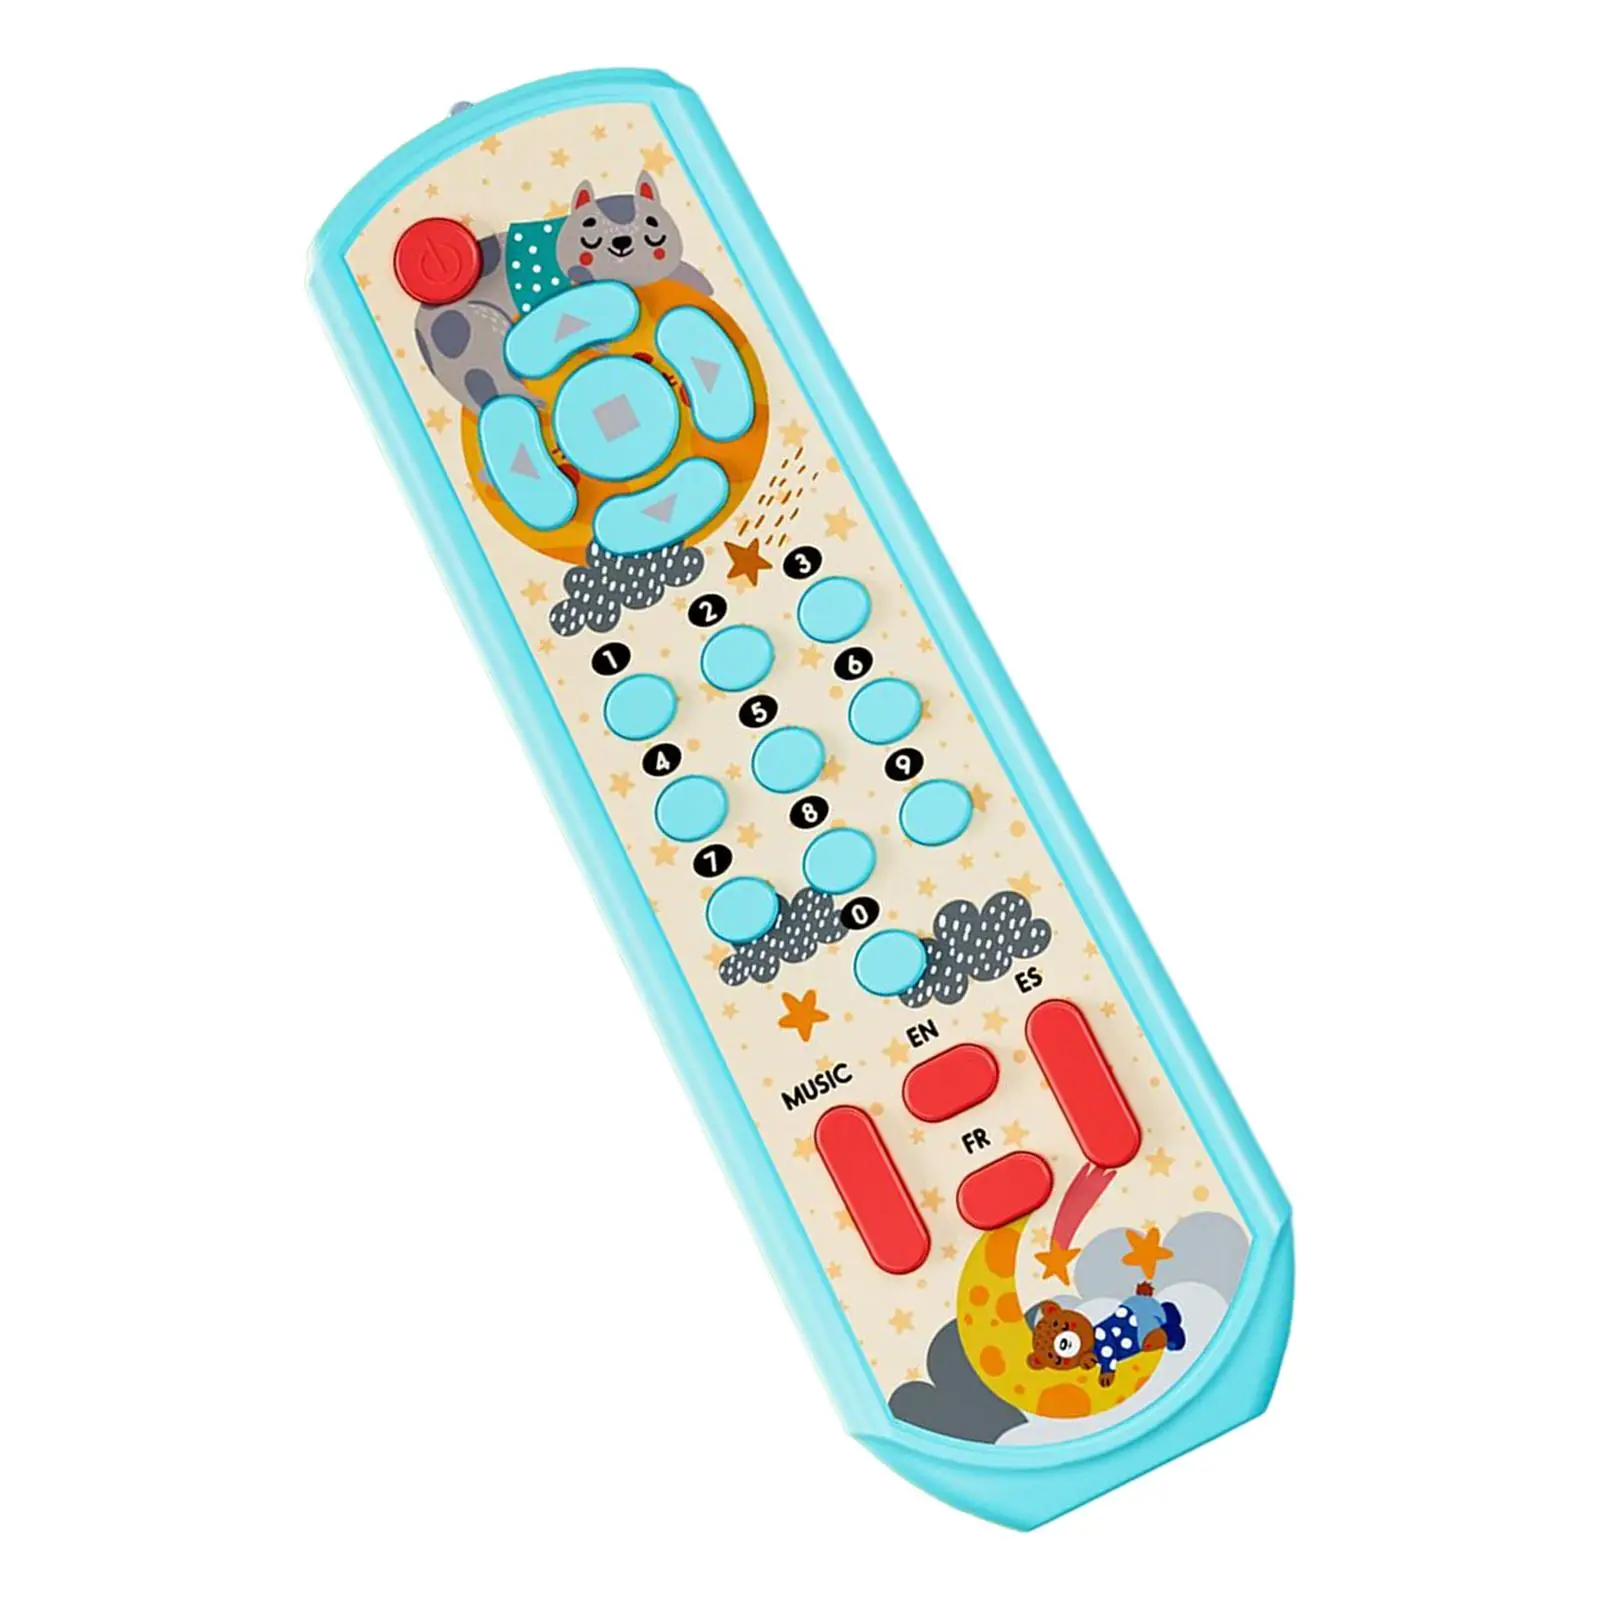 Remote Control Toys Music Education Toys Early Educational Toys with Sound Pretend Play for Travel Toddler Baby Birthday Gifts